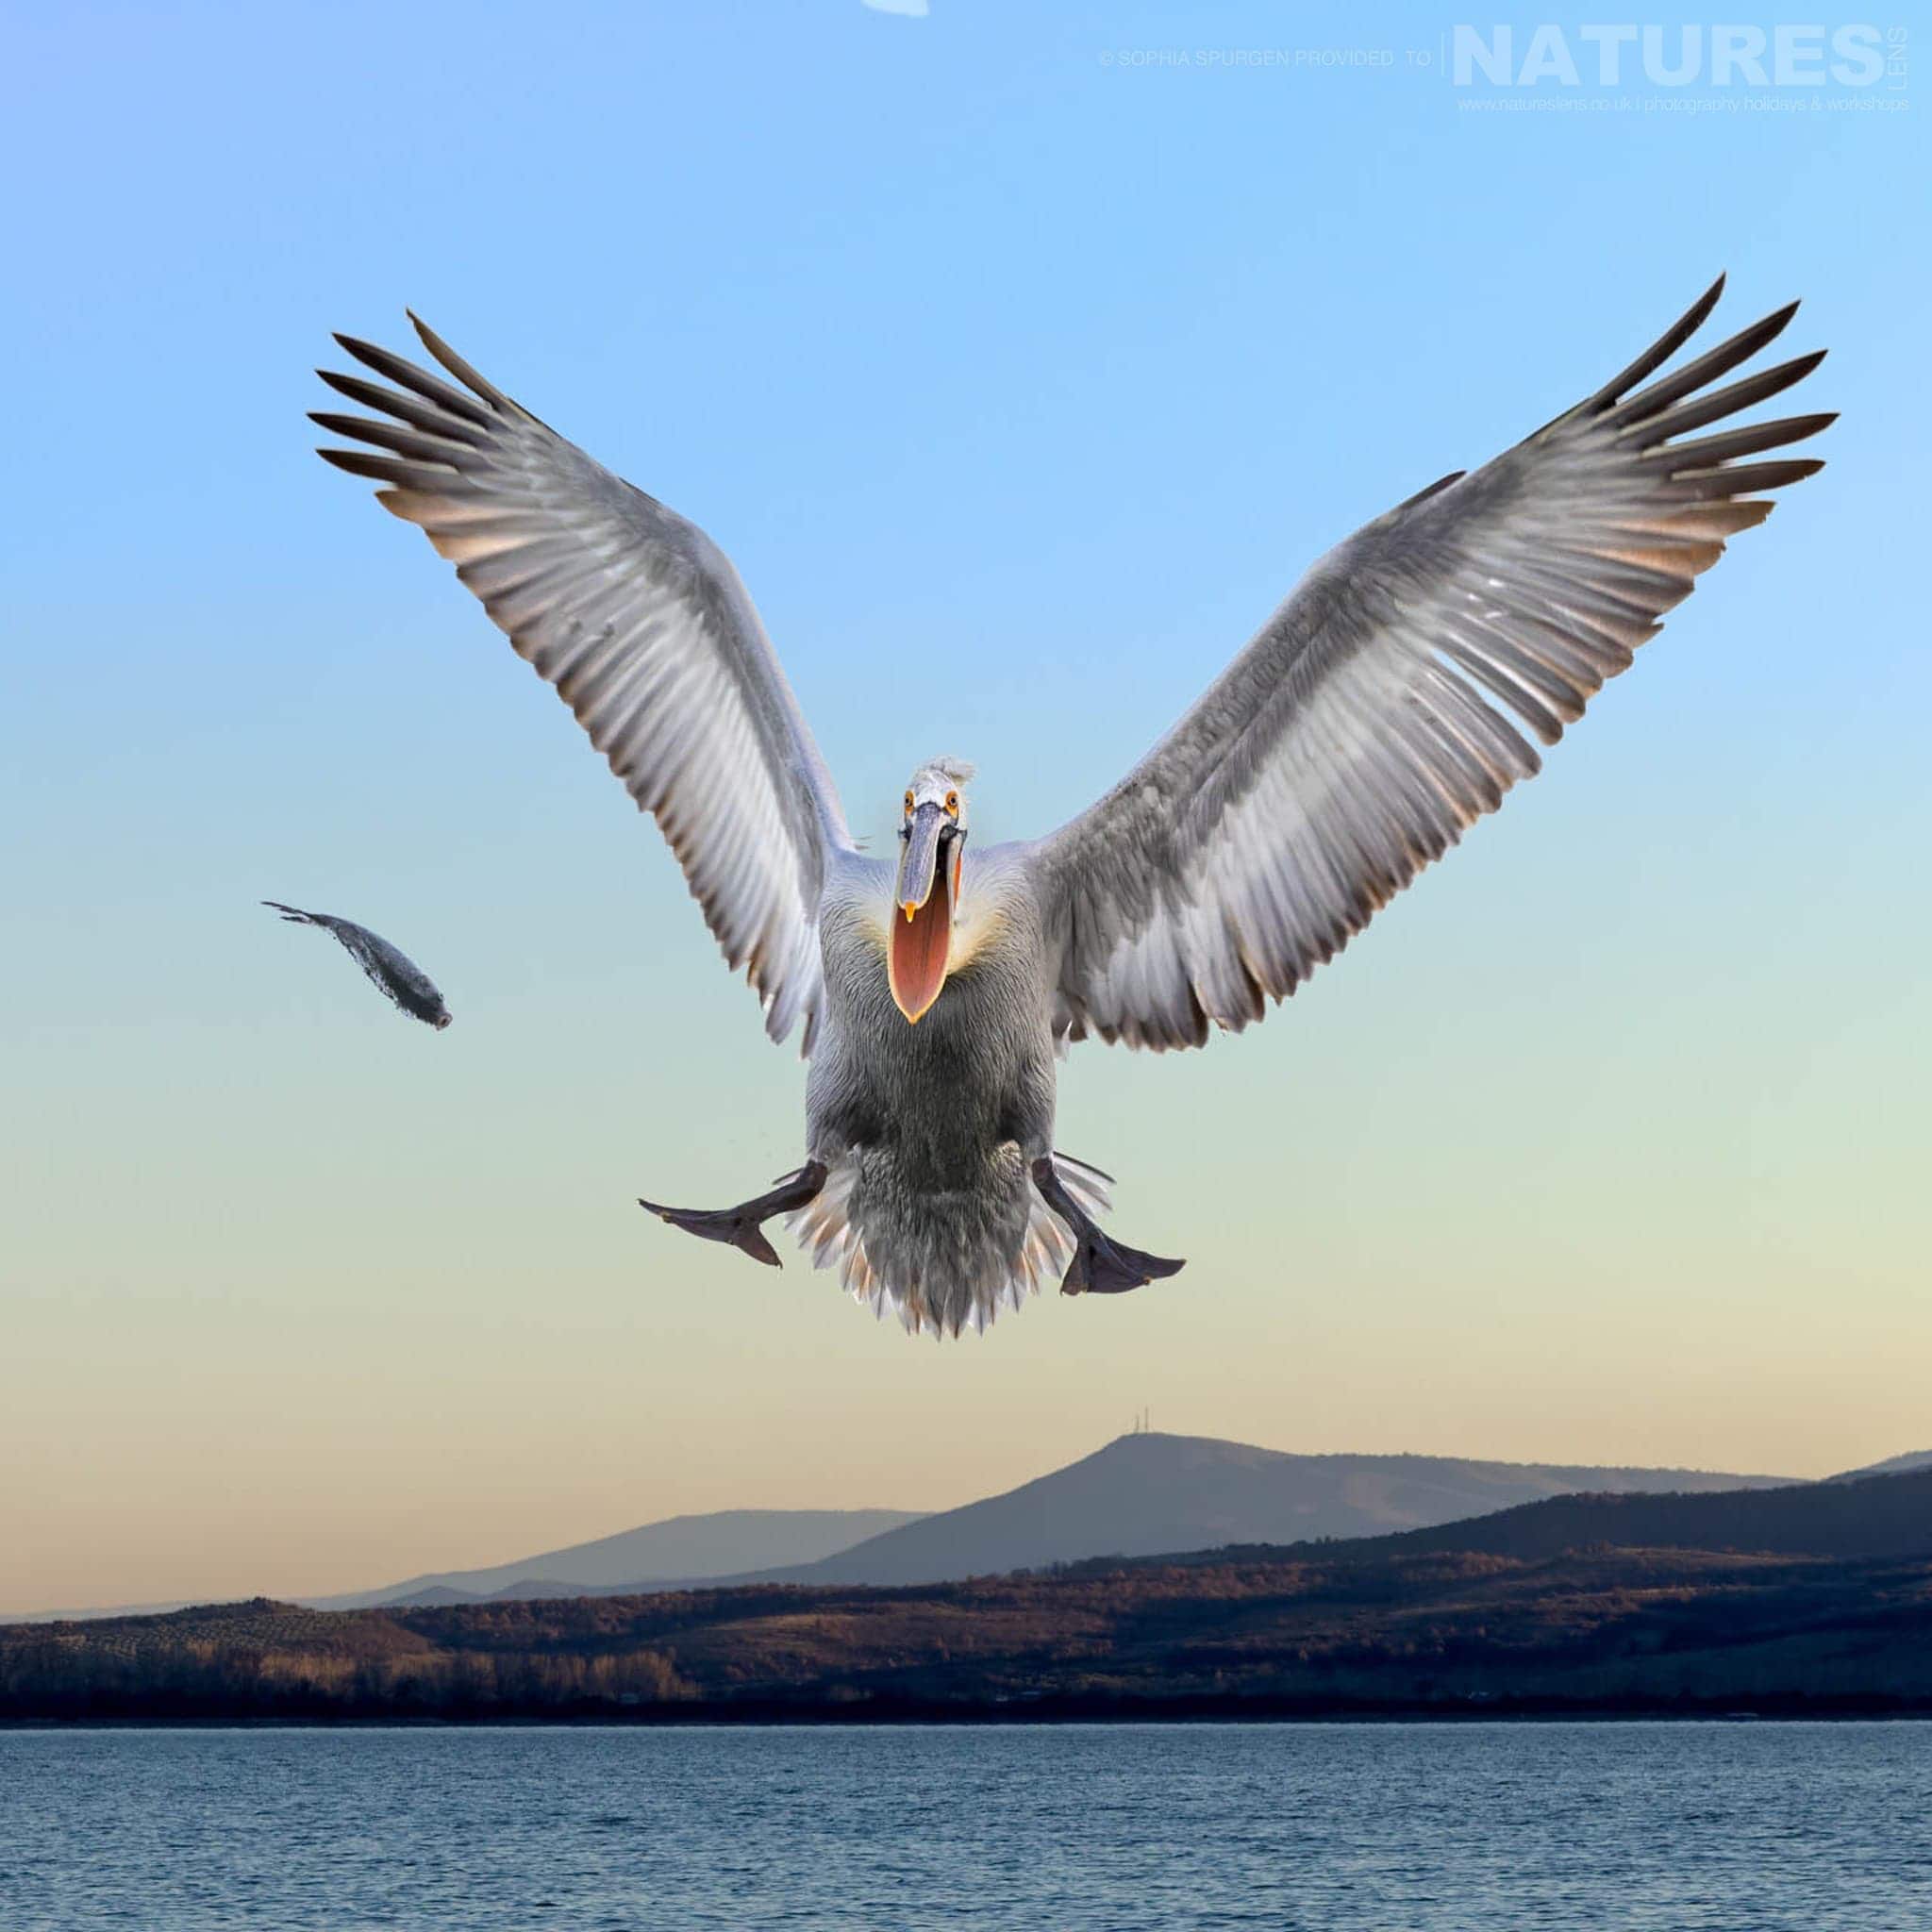 One Of The Dalmatian Pelicans Of Greece Attempts An Intercept On A Thrown Fish Above The Waters Of Lake Kerkini